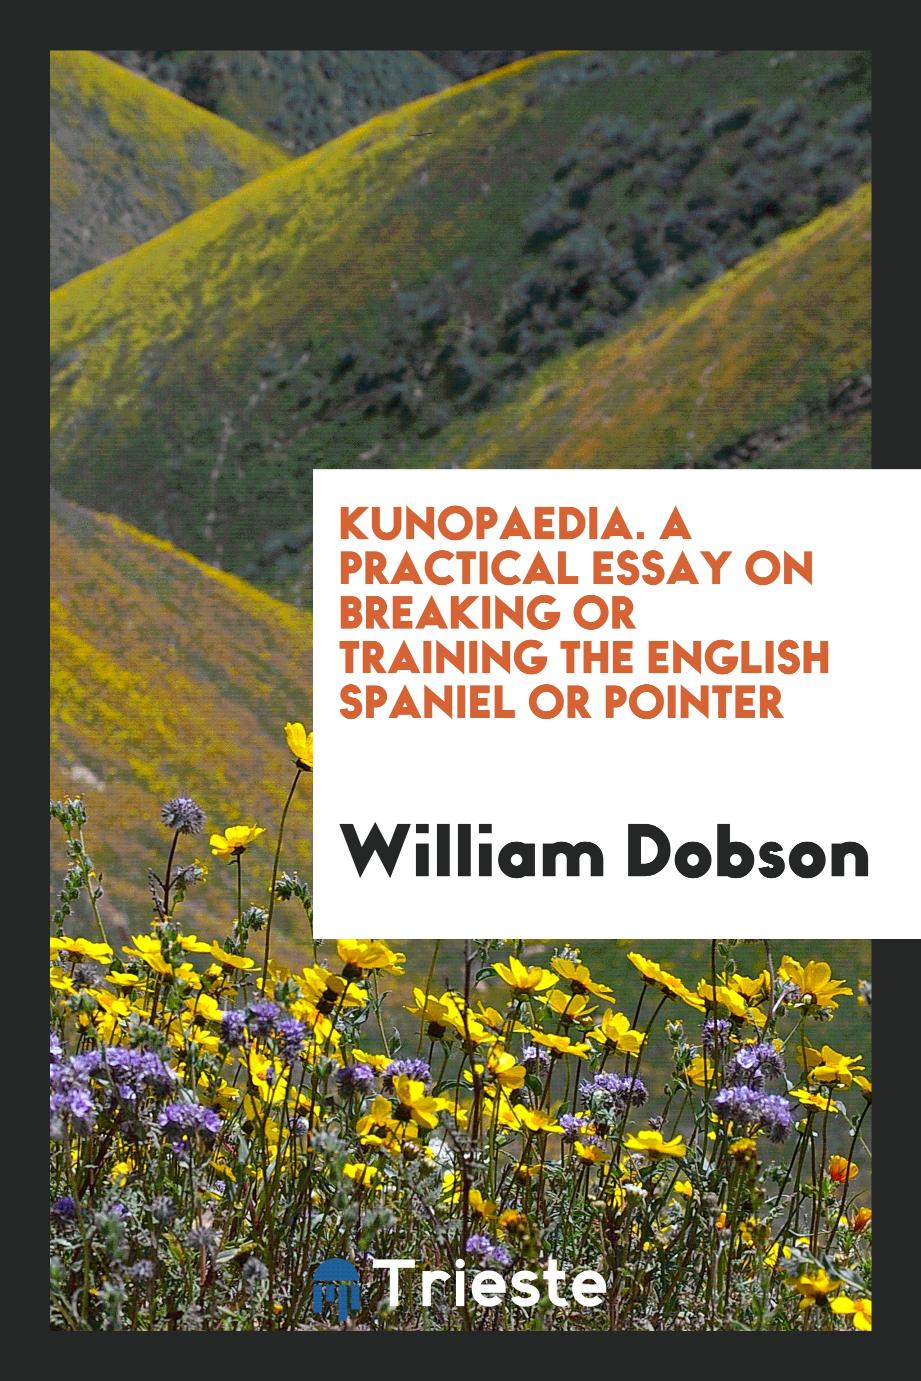 Kunopaedia. A practical essay on breaking or training the English spaniel or pointer